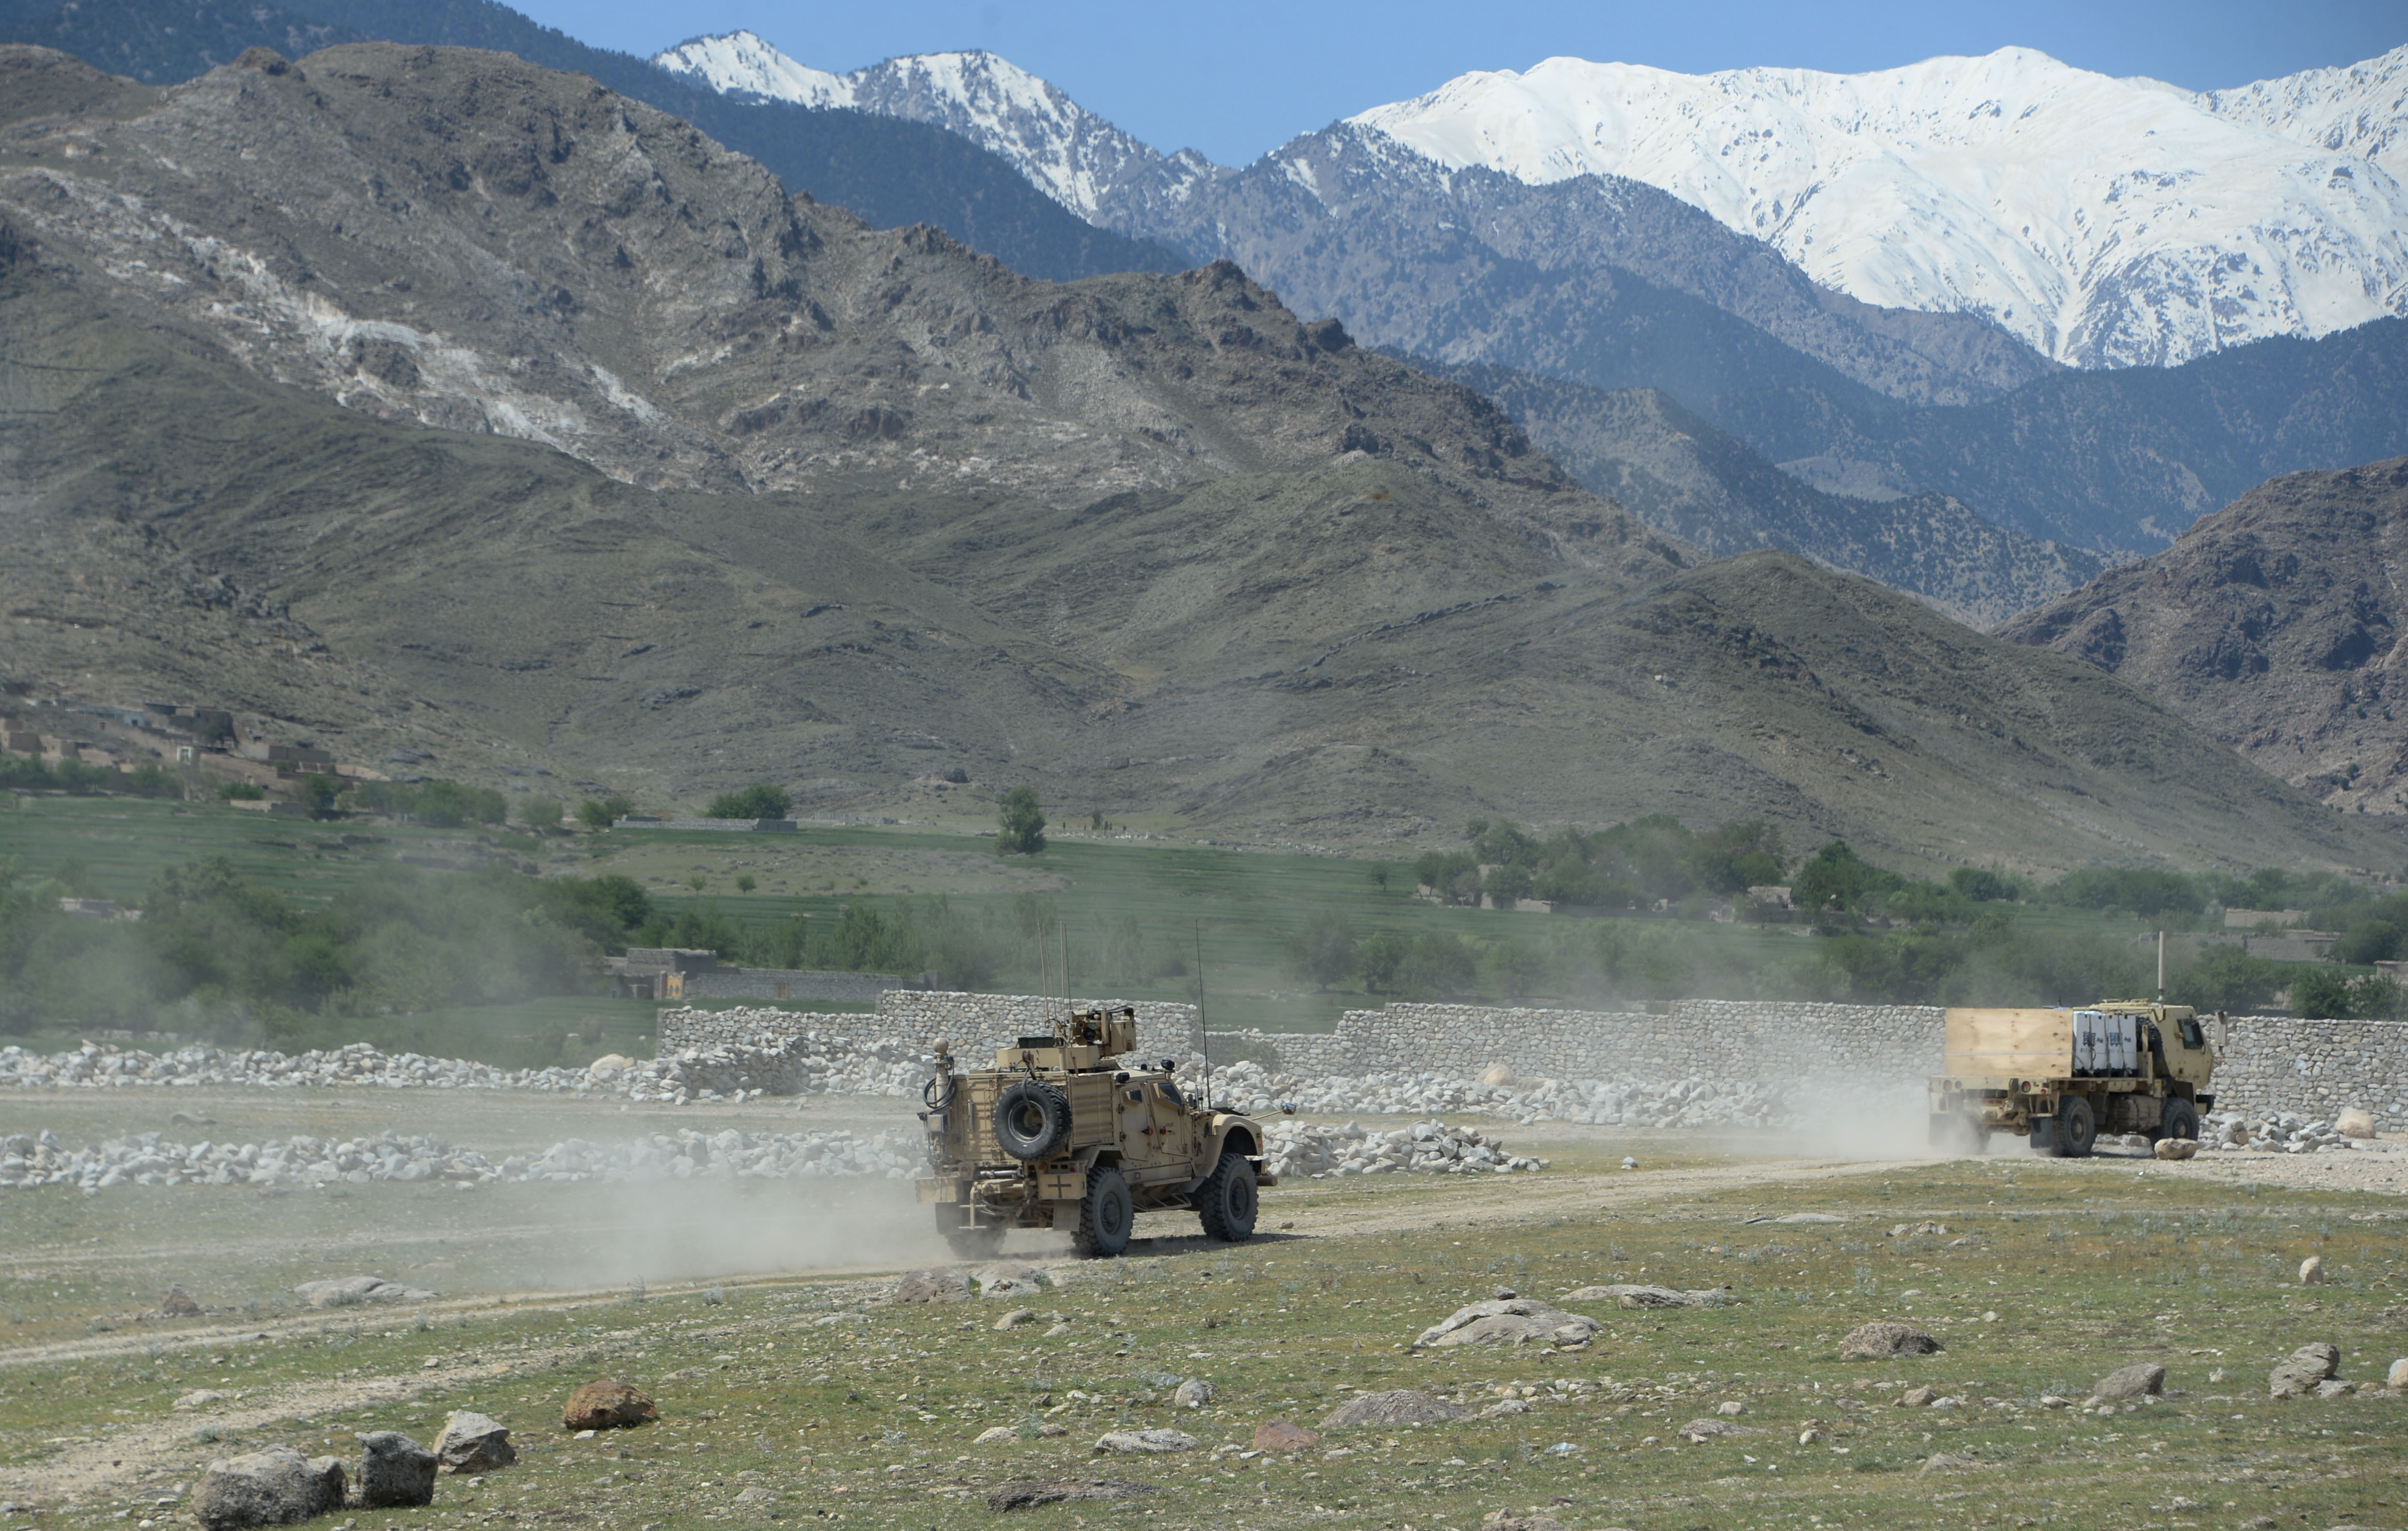 US armoured vehicles patrol near the site of a US bombing during an operation against Islamic State (IS) militants in the Achin district of Nangarhar province on April 15, 2017. (NOORULLAH SHIRZADA&mdash;AFP/Getty Images)